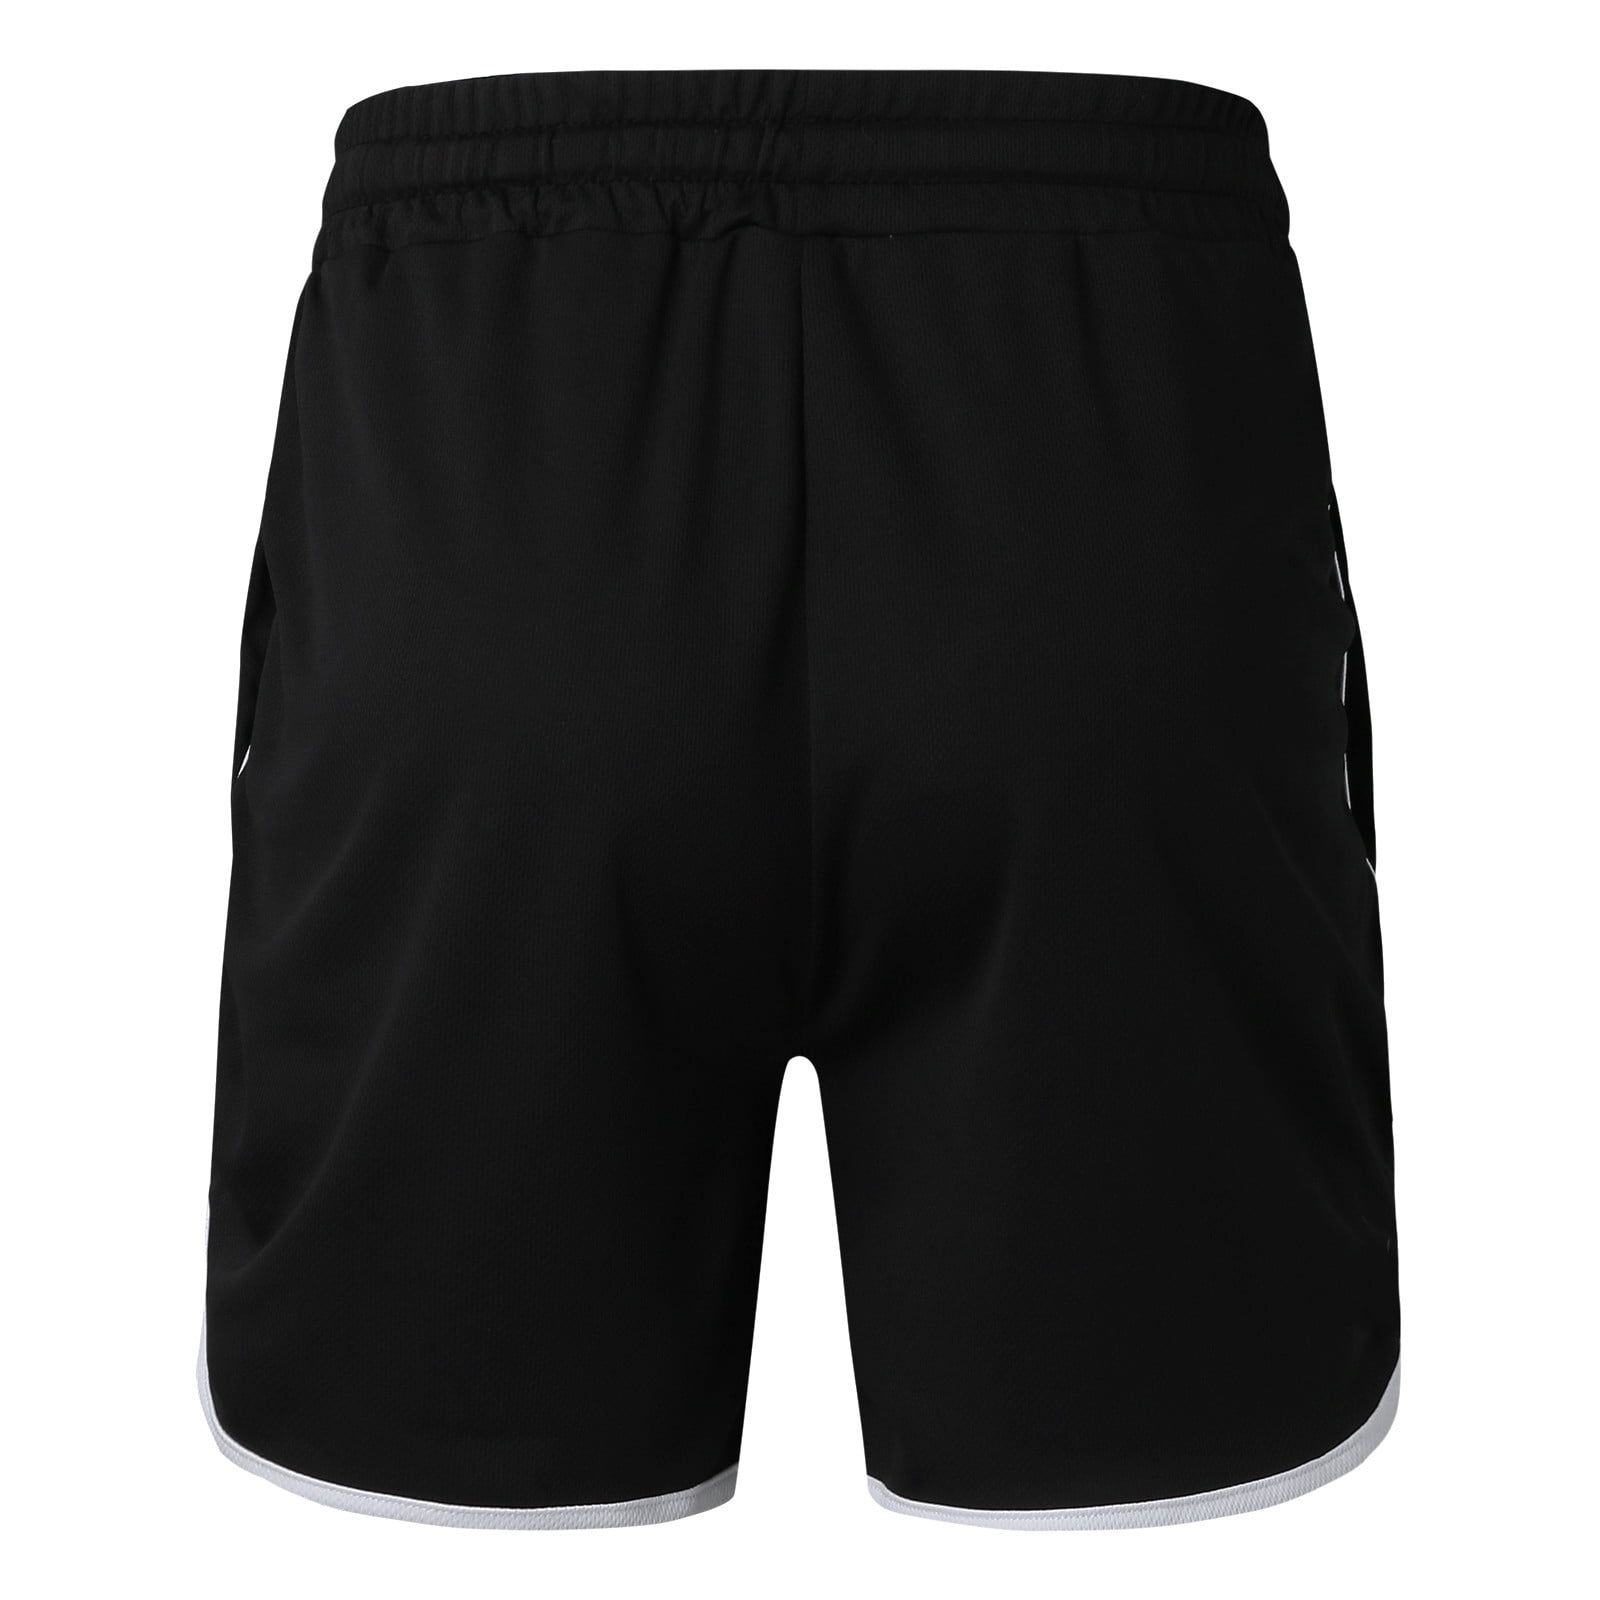 fvwitlyh Gymshark Shorts Men's 11 Inch Relaxed-Fit Stretch-Twill